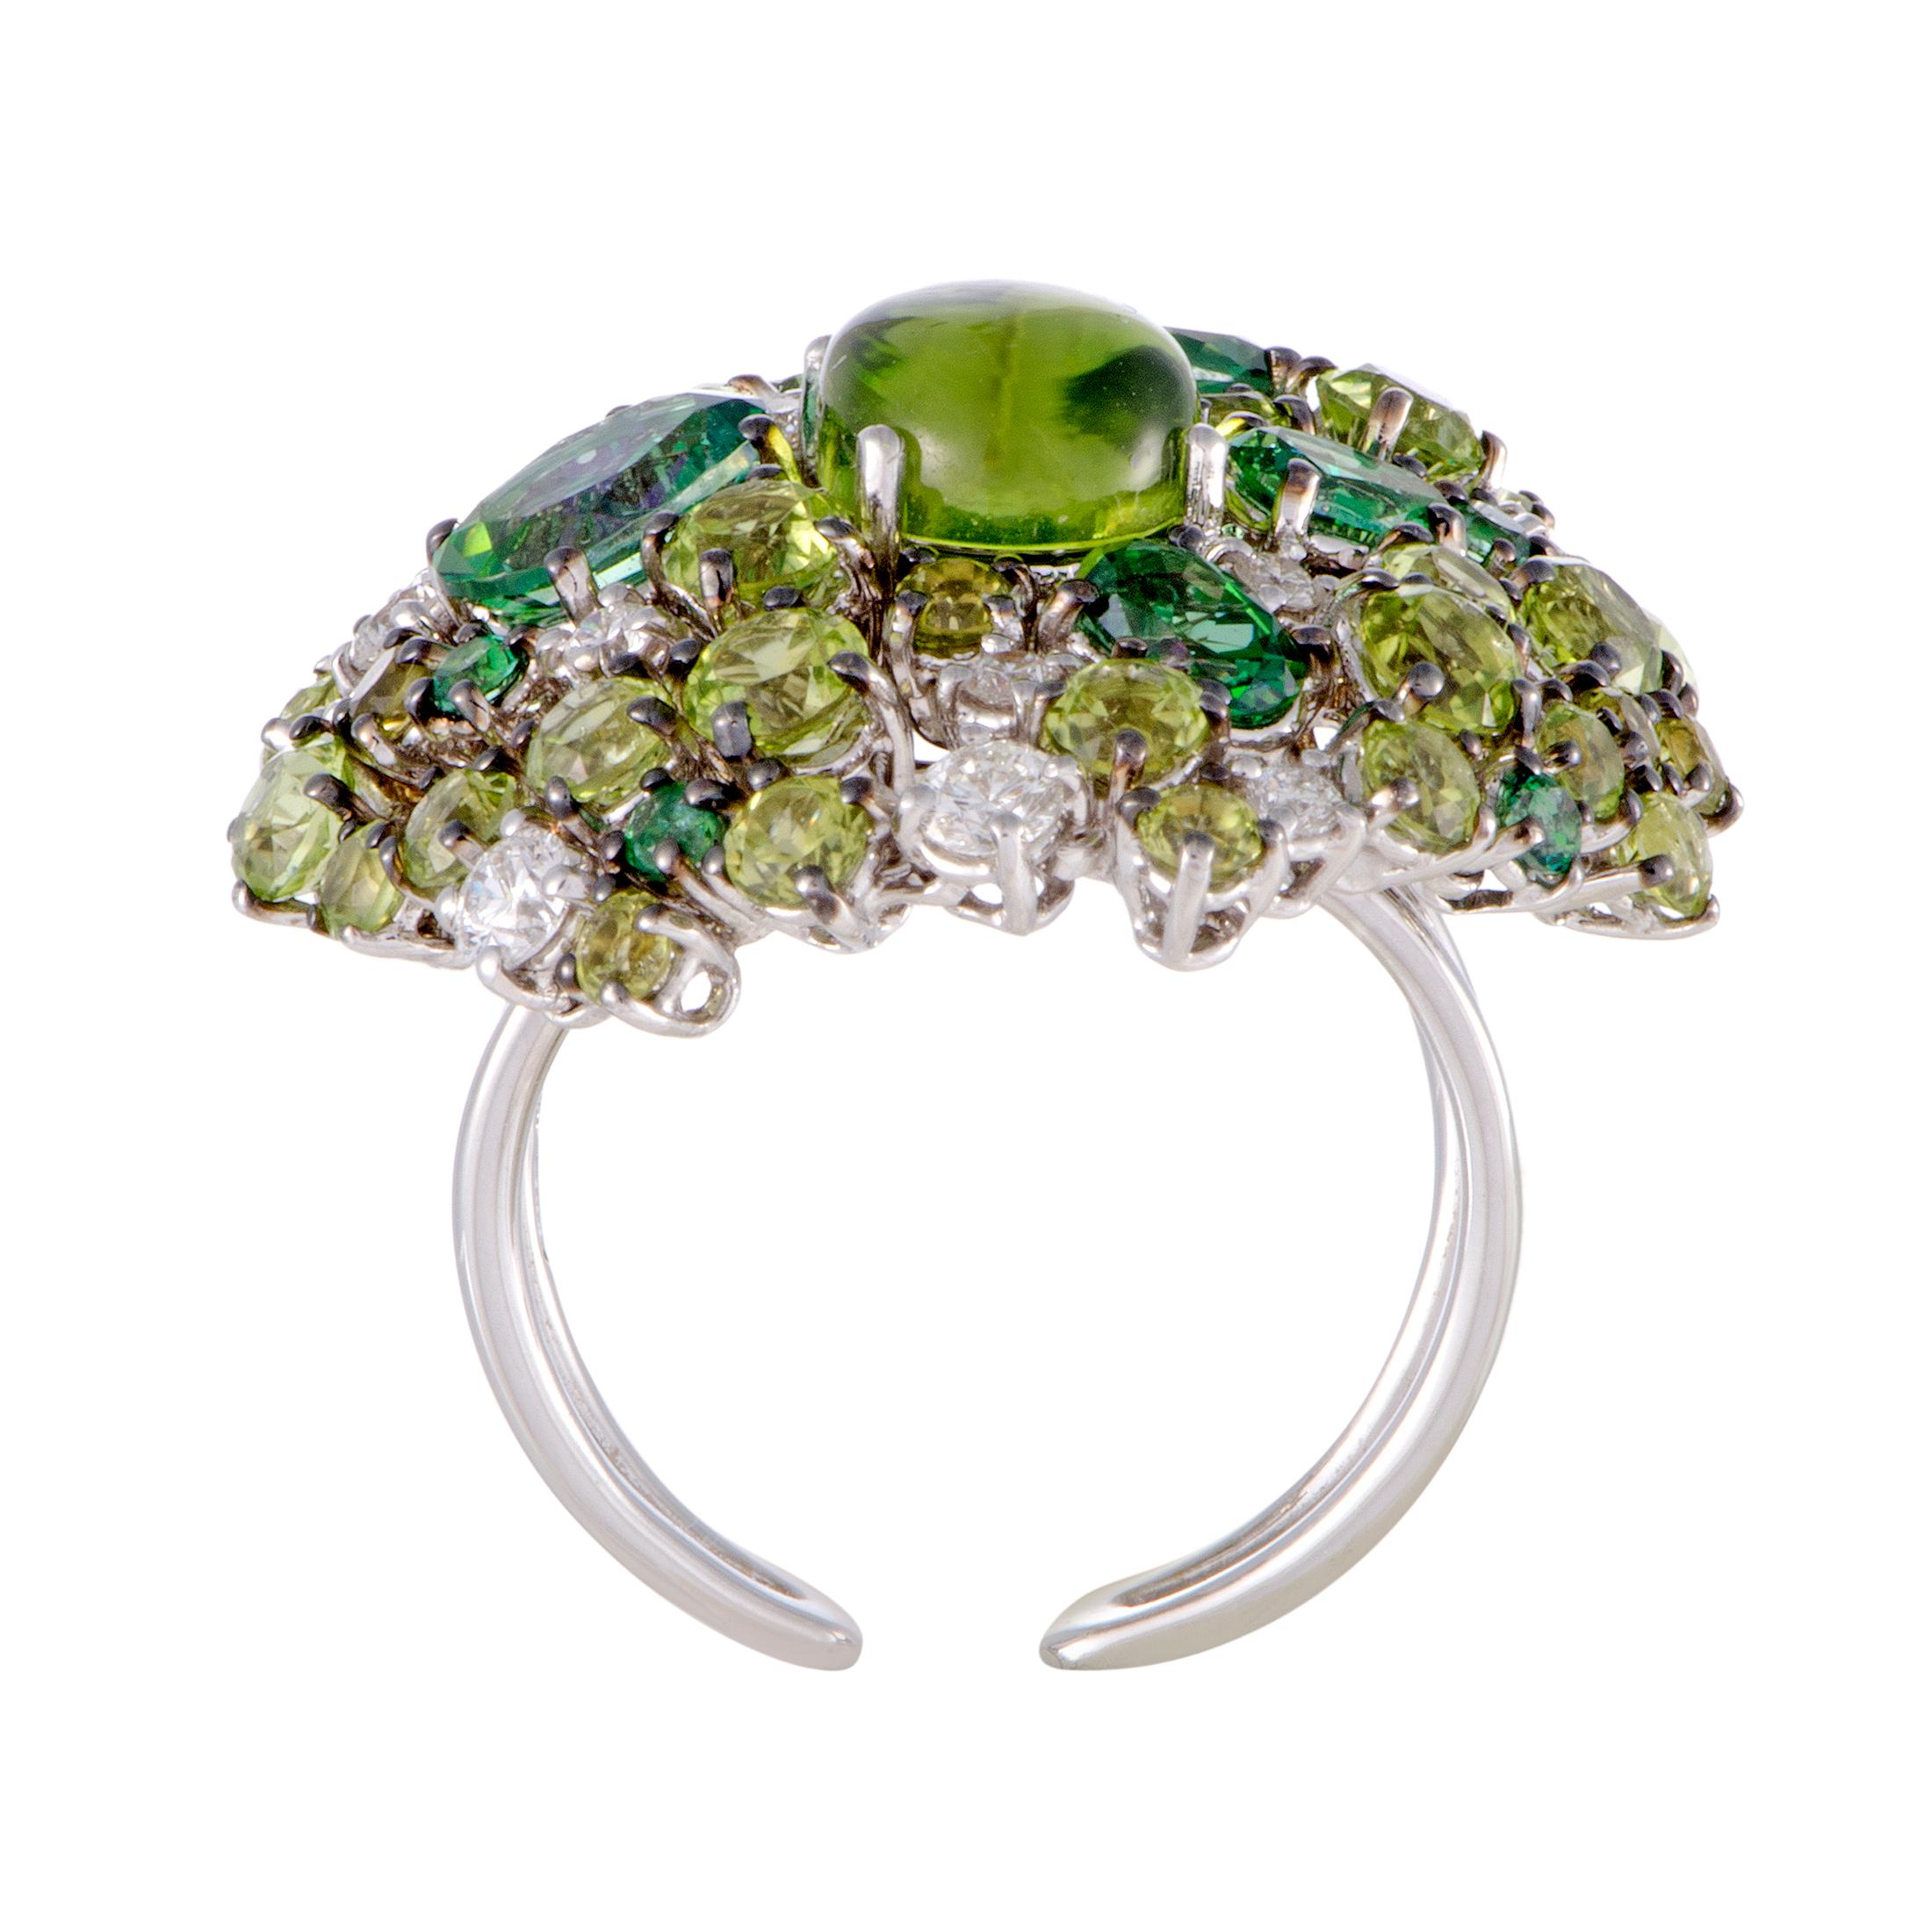 Lavish, harmonious and exquisitely crafted, this astonishing 18K white gold ring from Roberto Coin boasts a fine blend of sparkling diamonds totaling 0.47ct, splendid green topaz stones amounting to 2.60 carats and stunning peridots weighing in